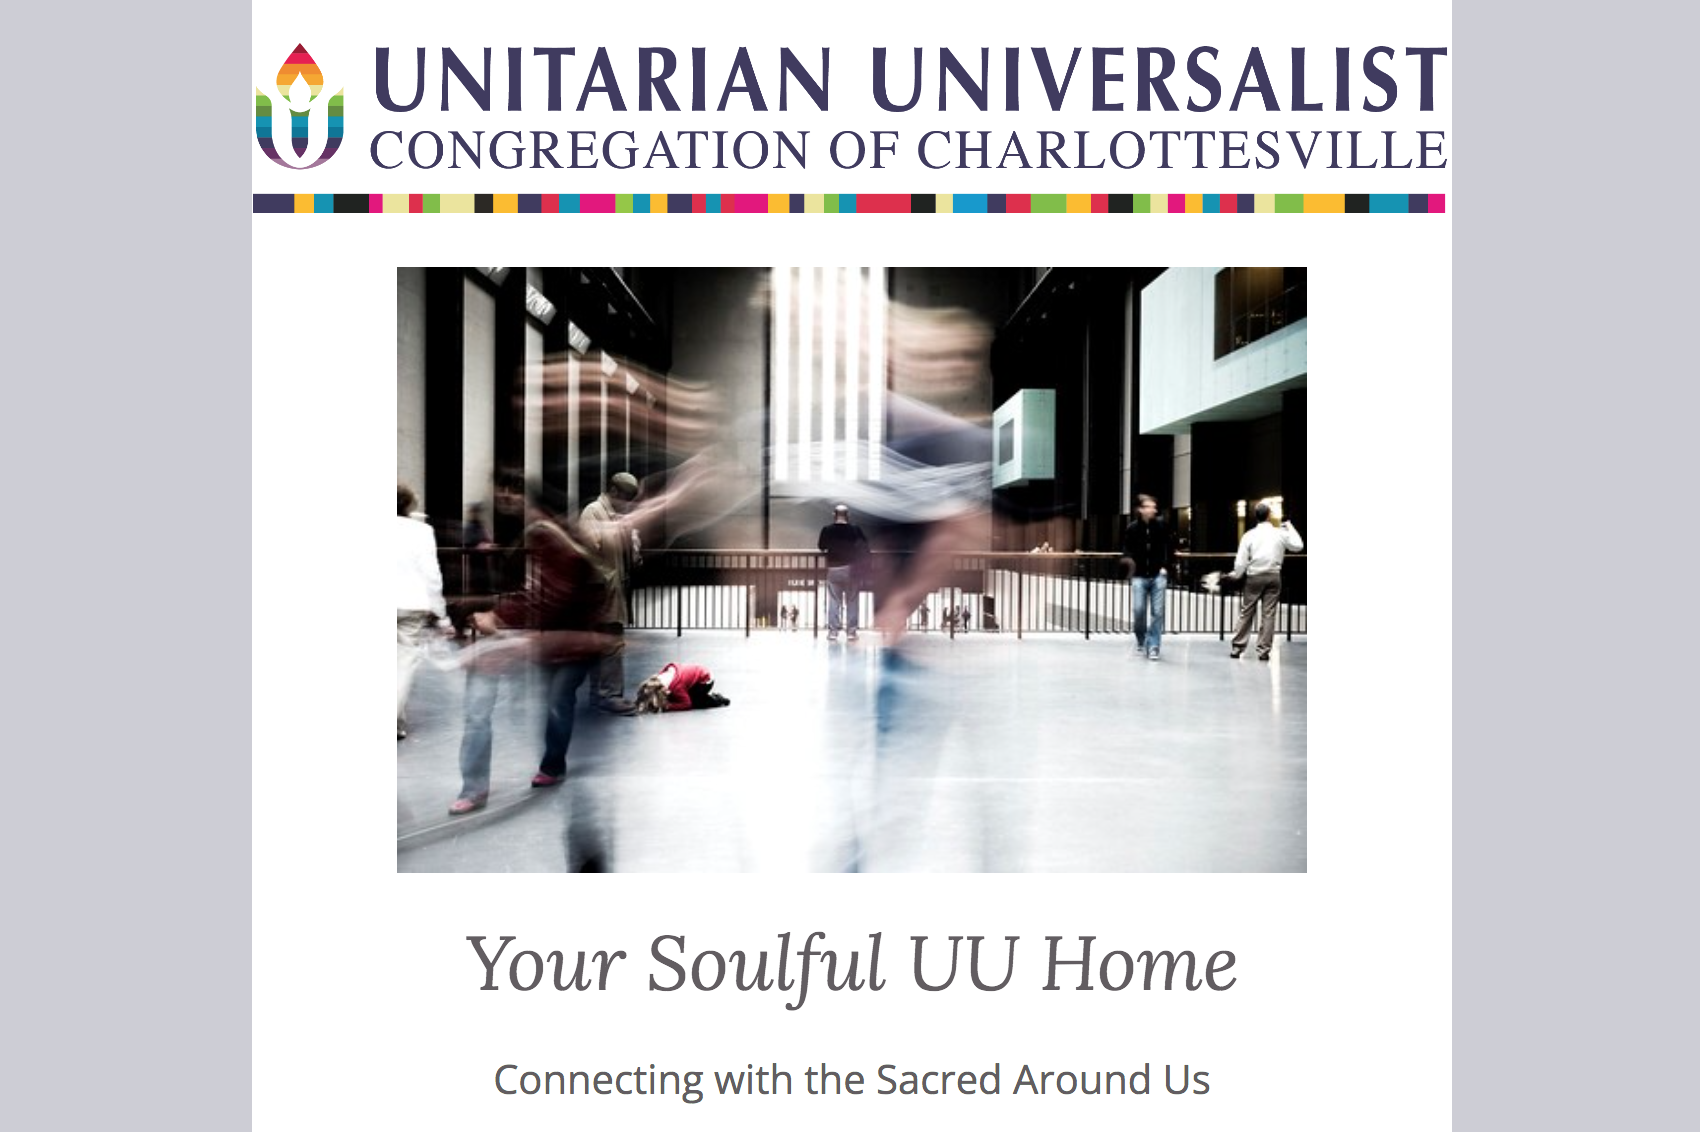 soulful home newsletter thumbnail as link